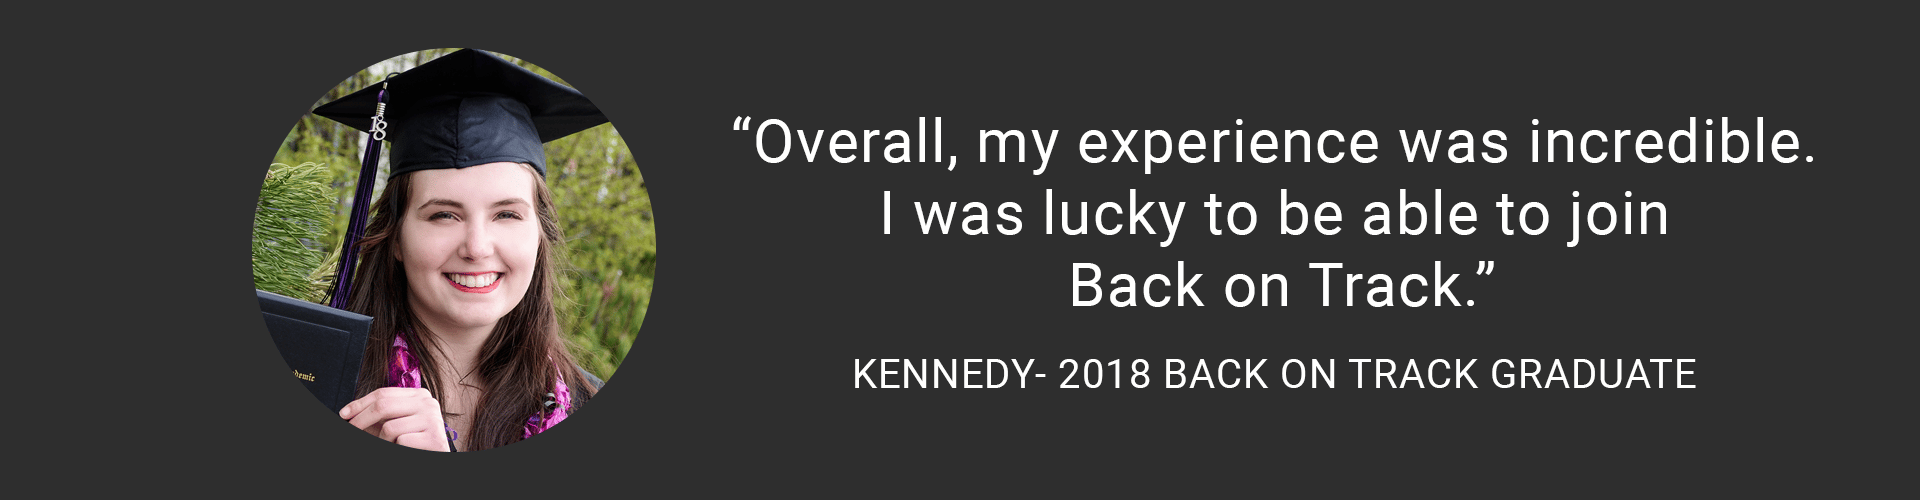 KENNEDY-QUOTE-5